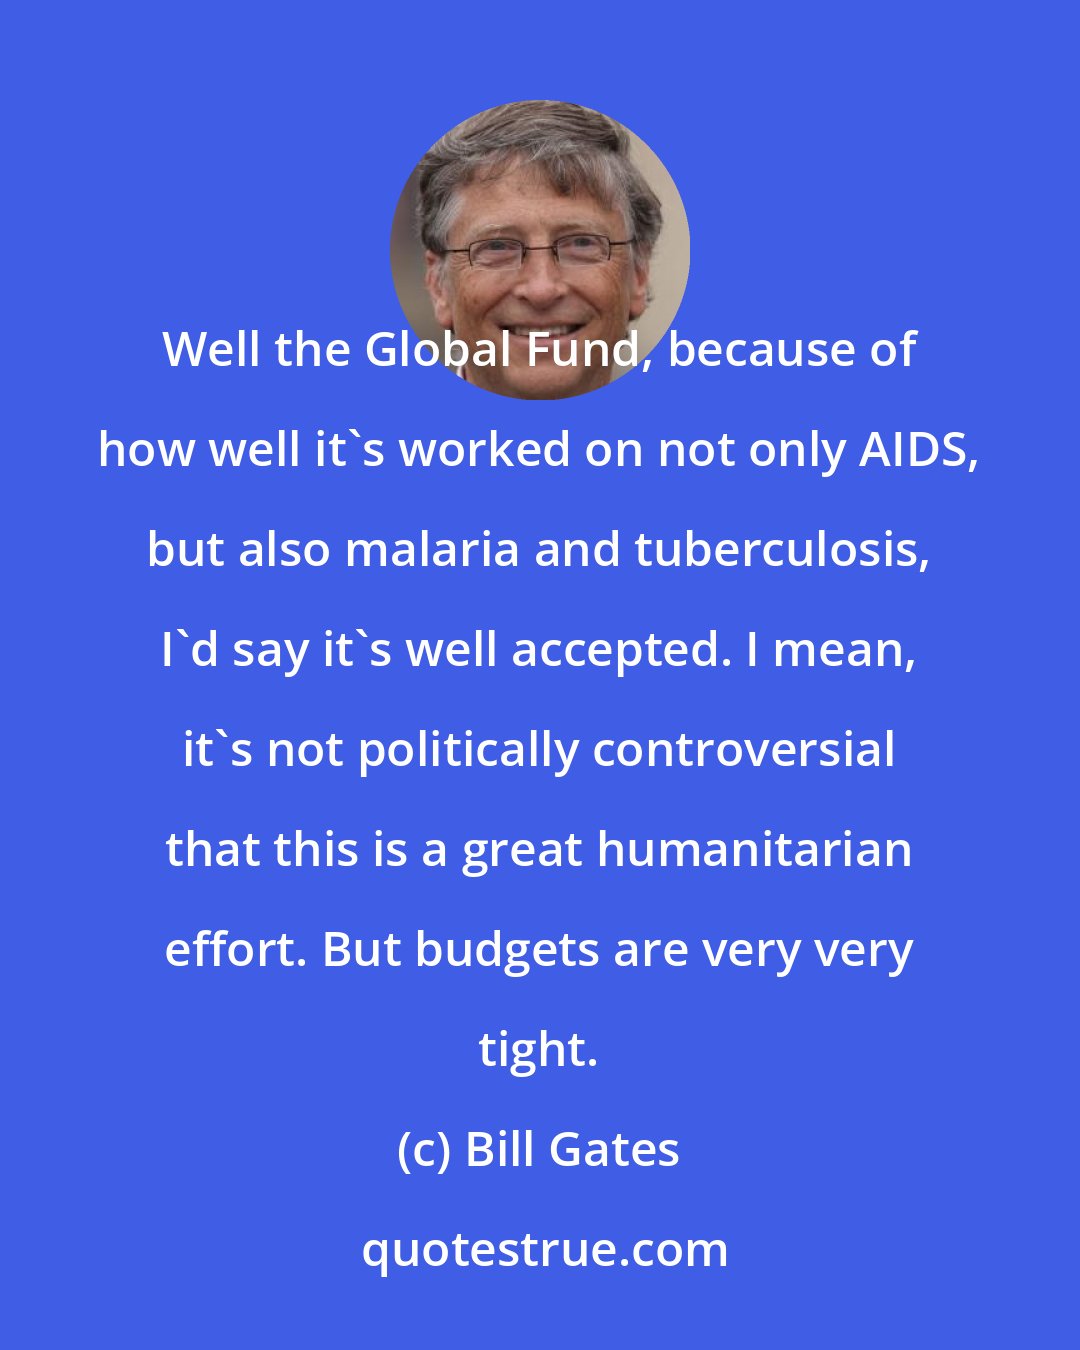 Bill Gates: Well the Global Fund, because of how well it's worked on not only AIDS, but also malaria and tuberculosis, I'd say it's well accepted. I mean, it's not politically controversial that this is a great humanitarian effort. But budgets are very very tight.